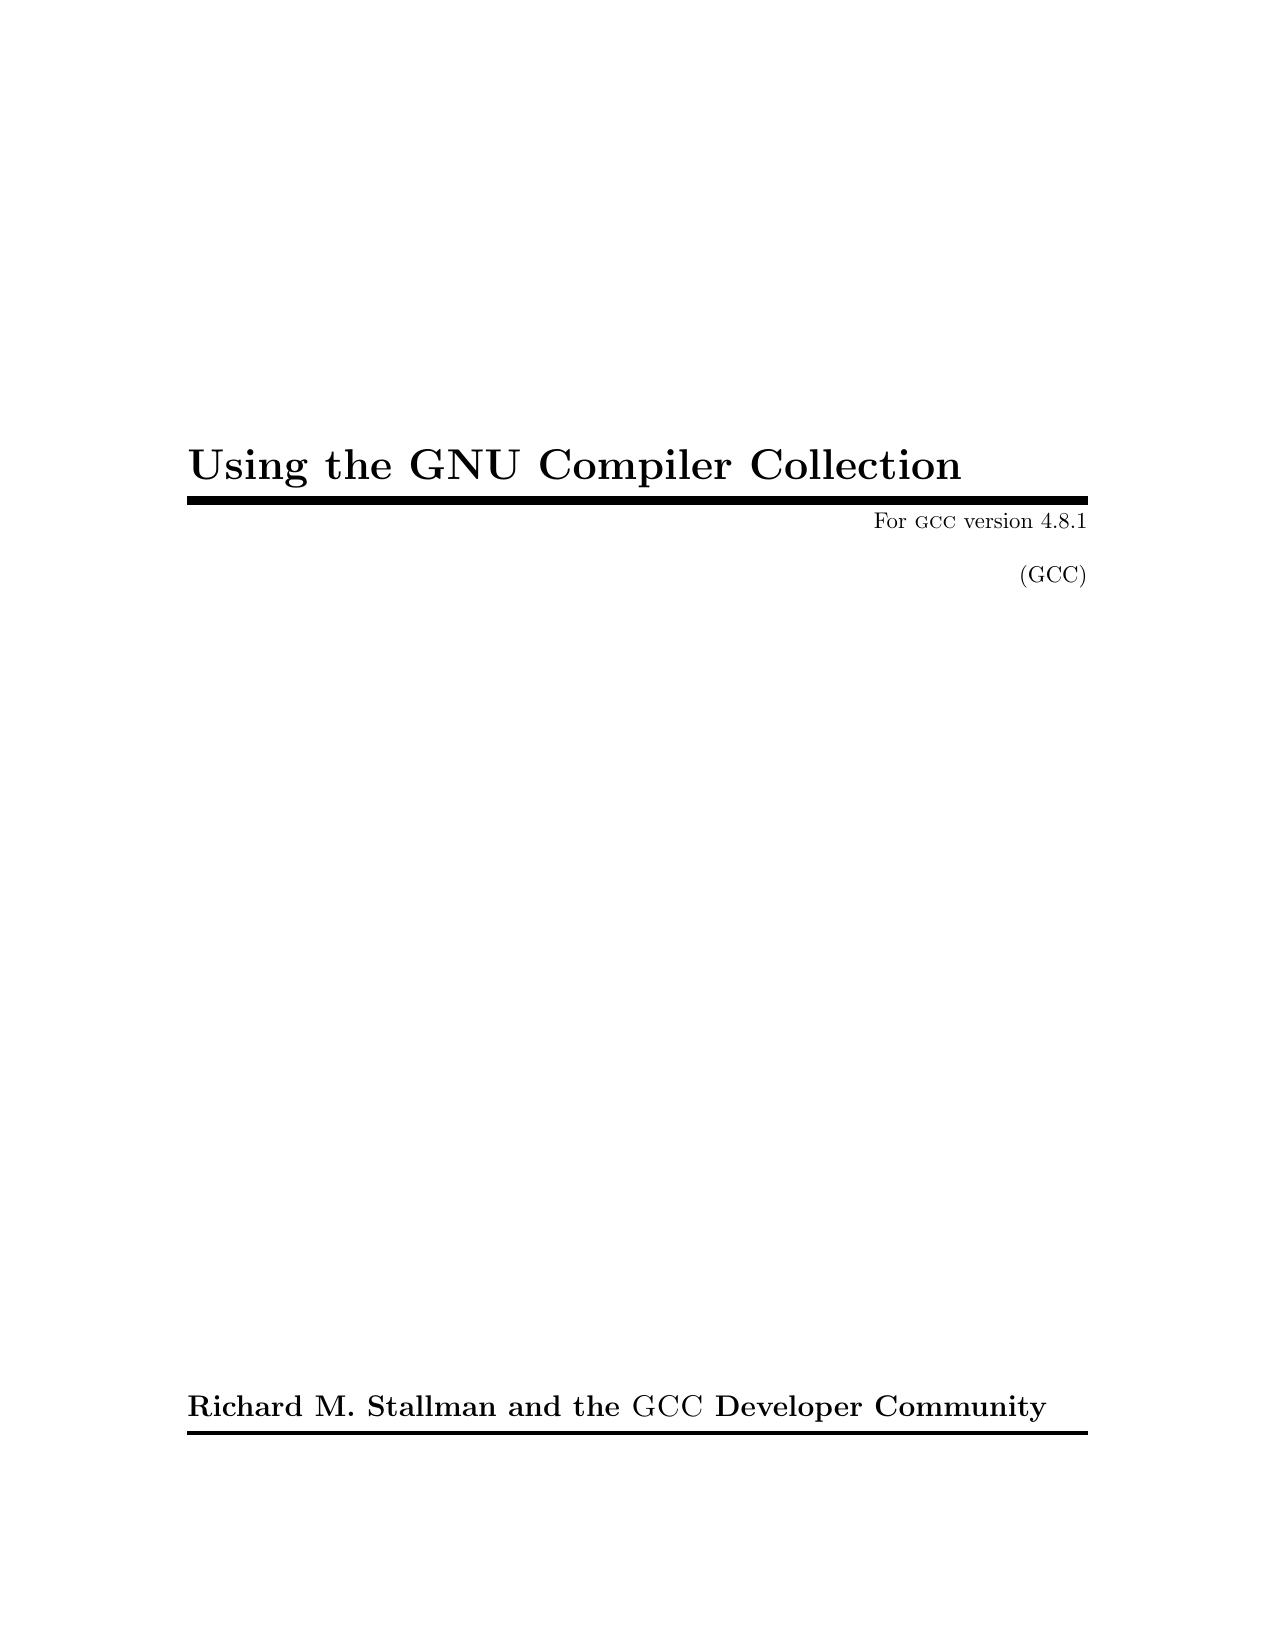 Using the GNU Compiler Collection GCC 4.8.1